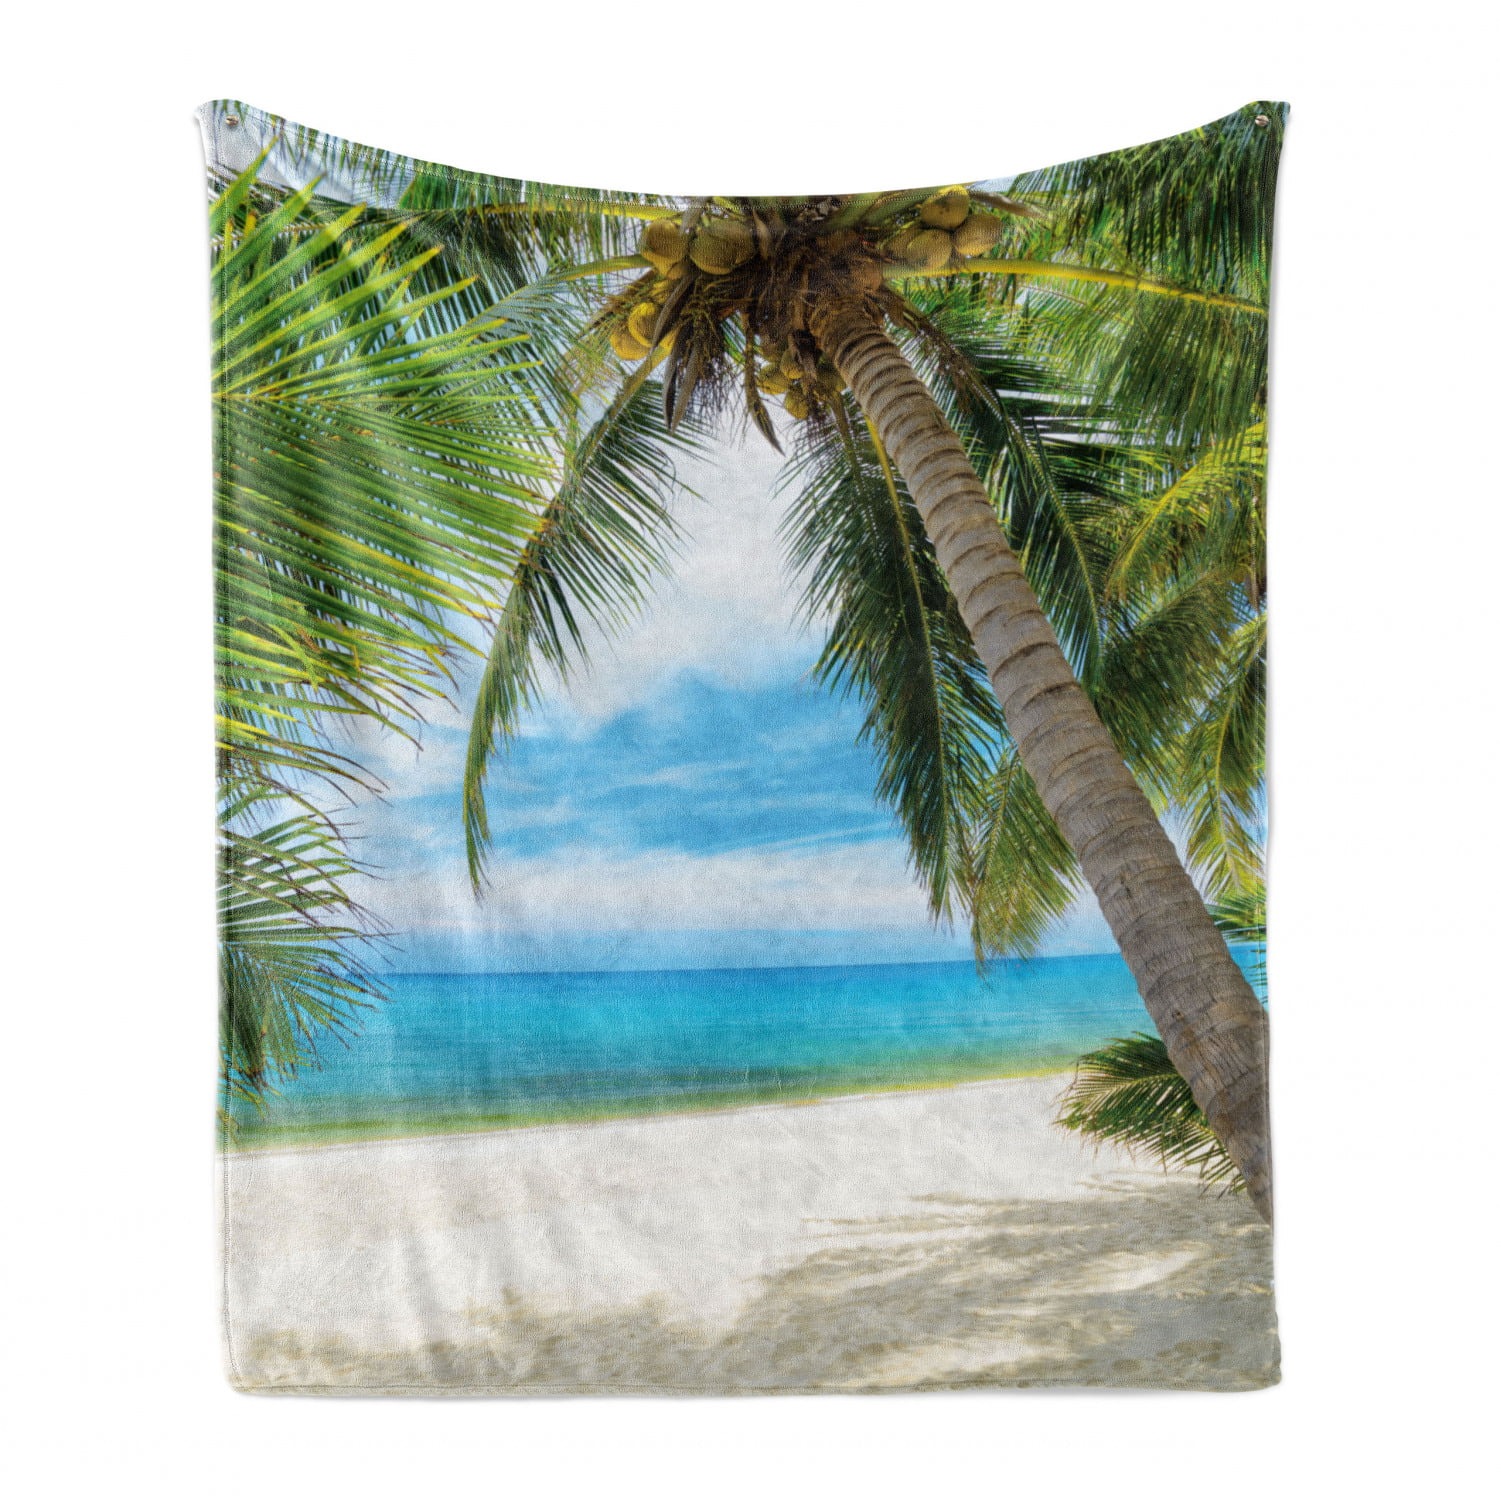 Details about   3D Coconut Tree NAO169 Summer Plush Fleece Blanket Picnic Beach Towel Dry Fay 